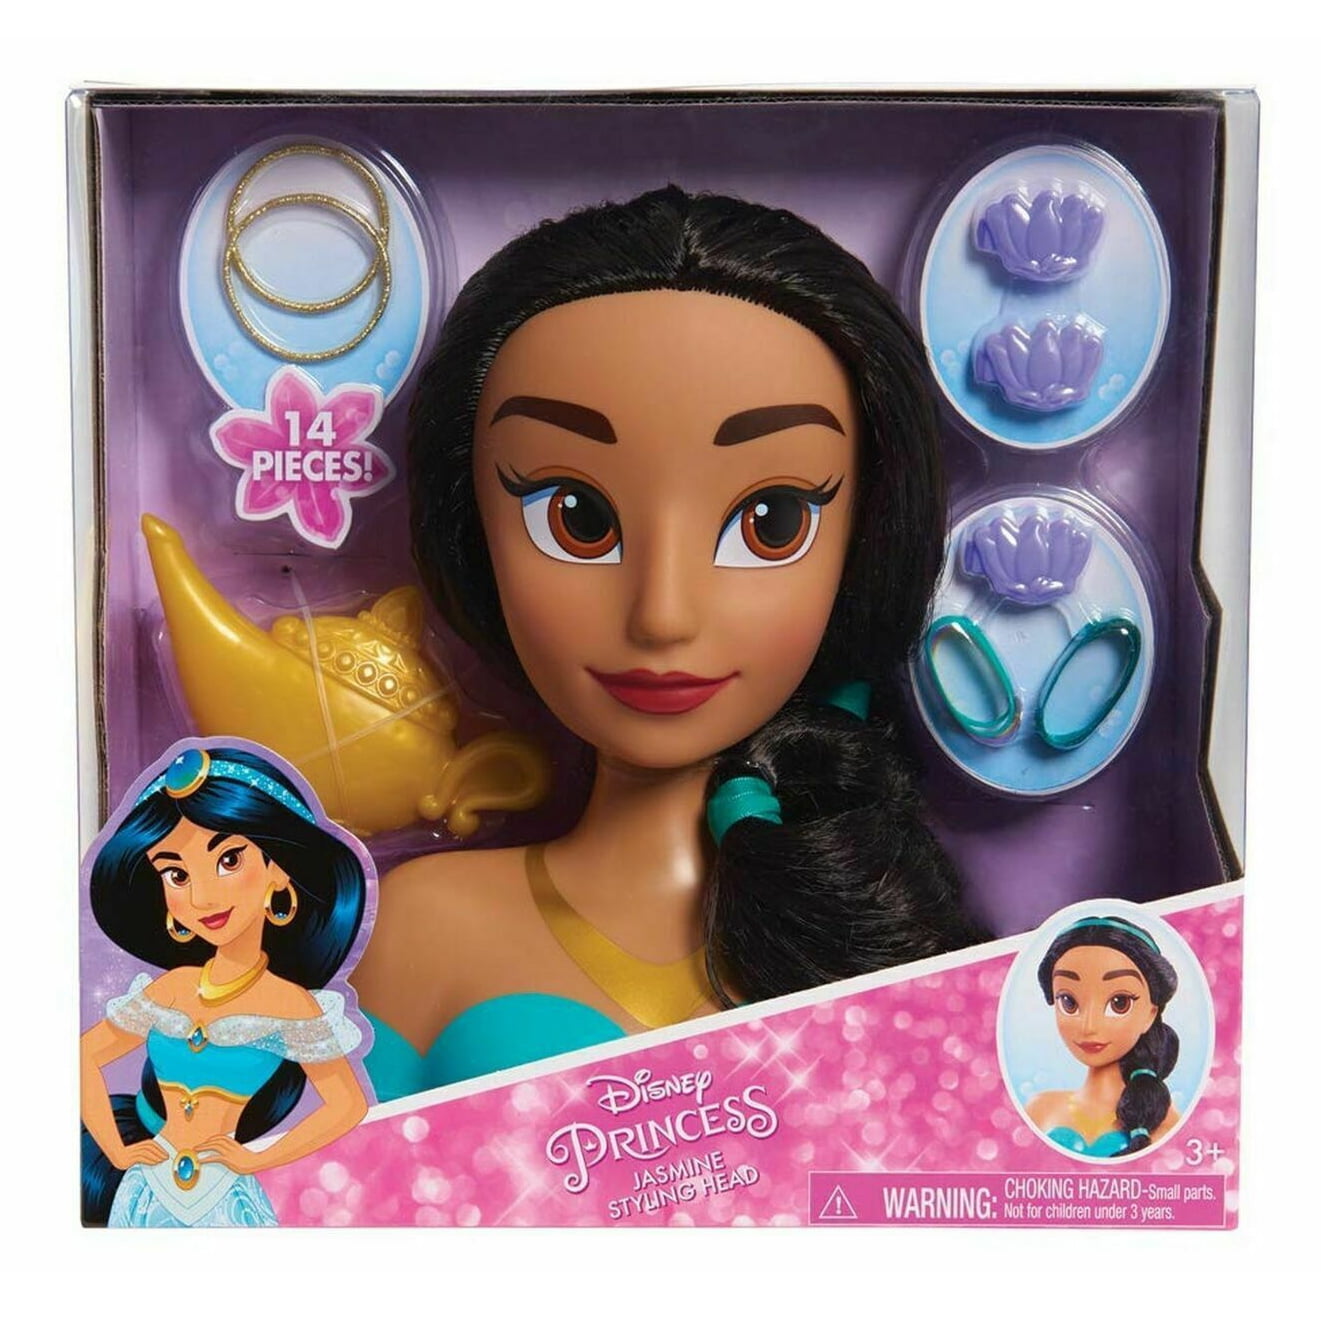 Disney Princess Belle Styling Head, Brown Hair, 10 Piece Pretend Play Set,  Beauty and the Beast, Officially Licensed Kids Toys for Ages 3 Up, Gifts